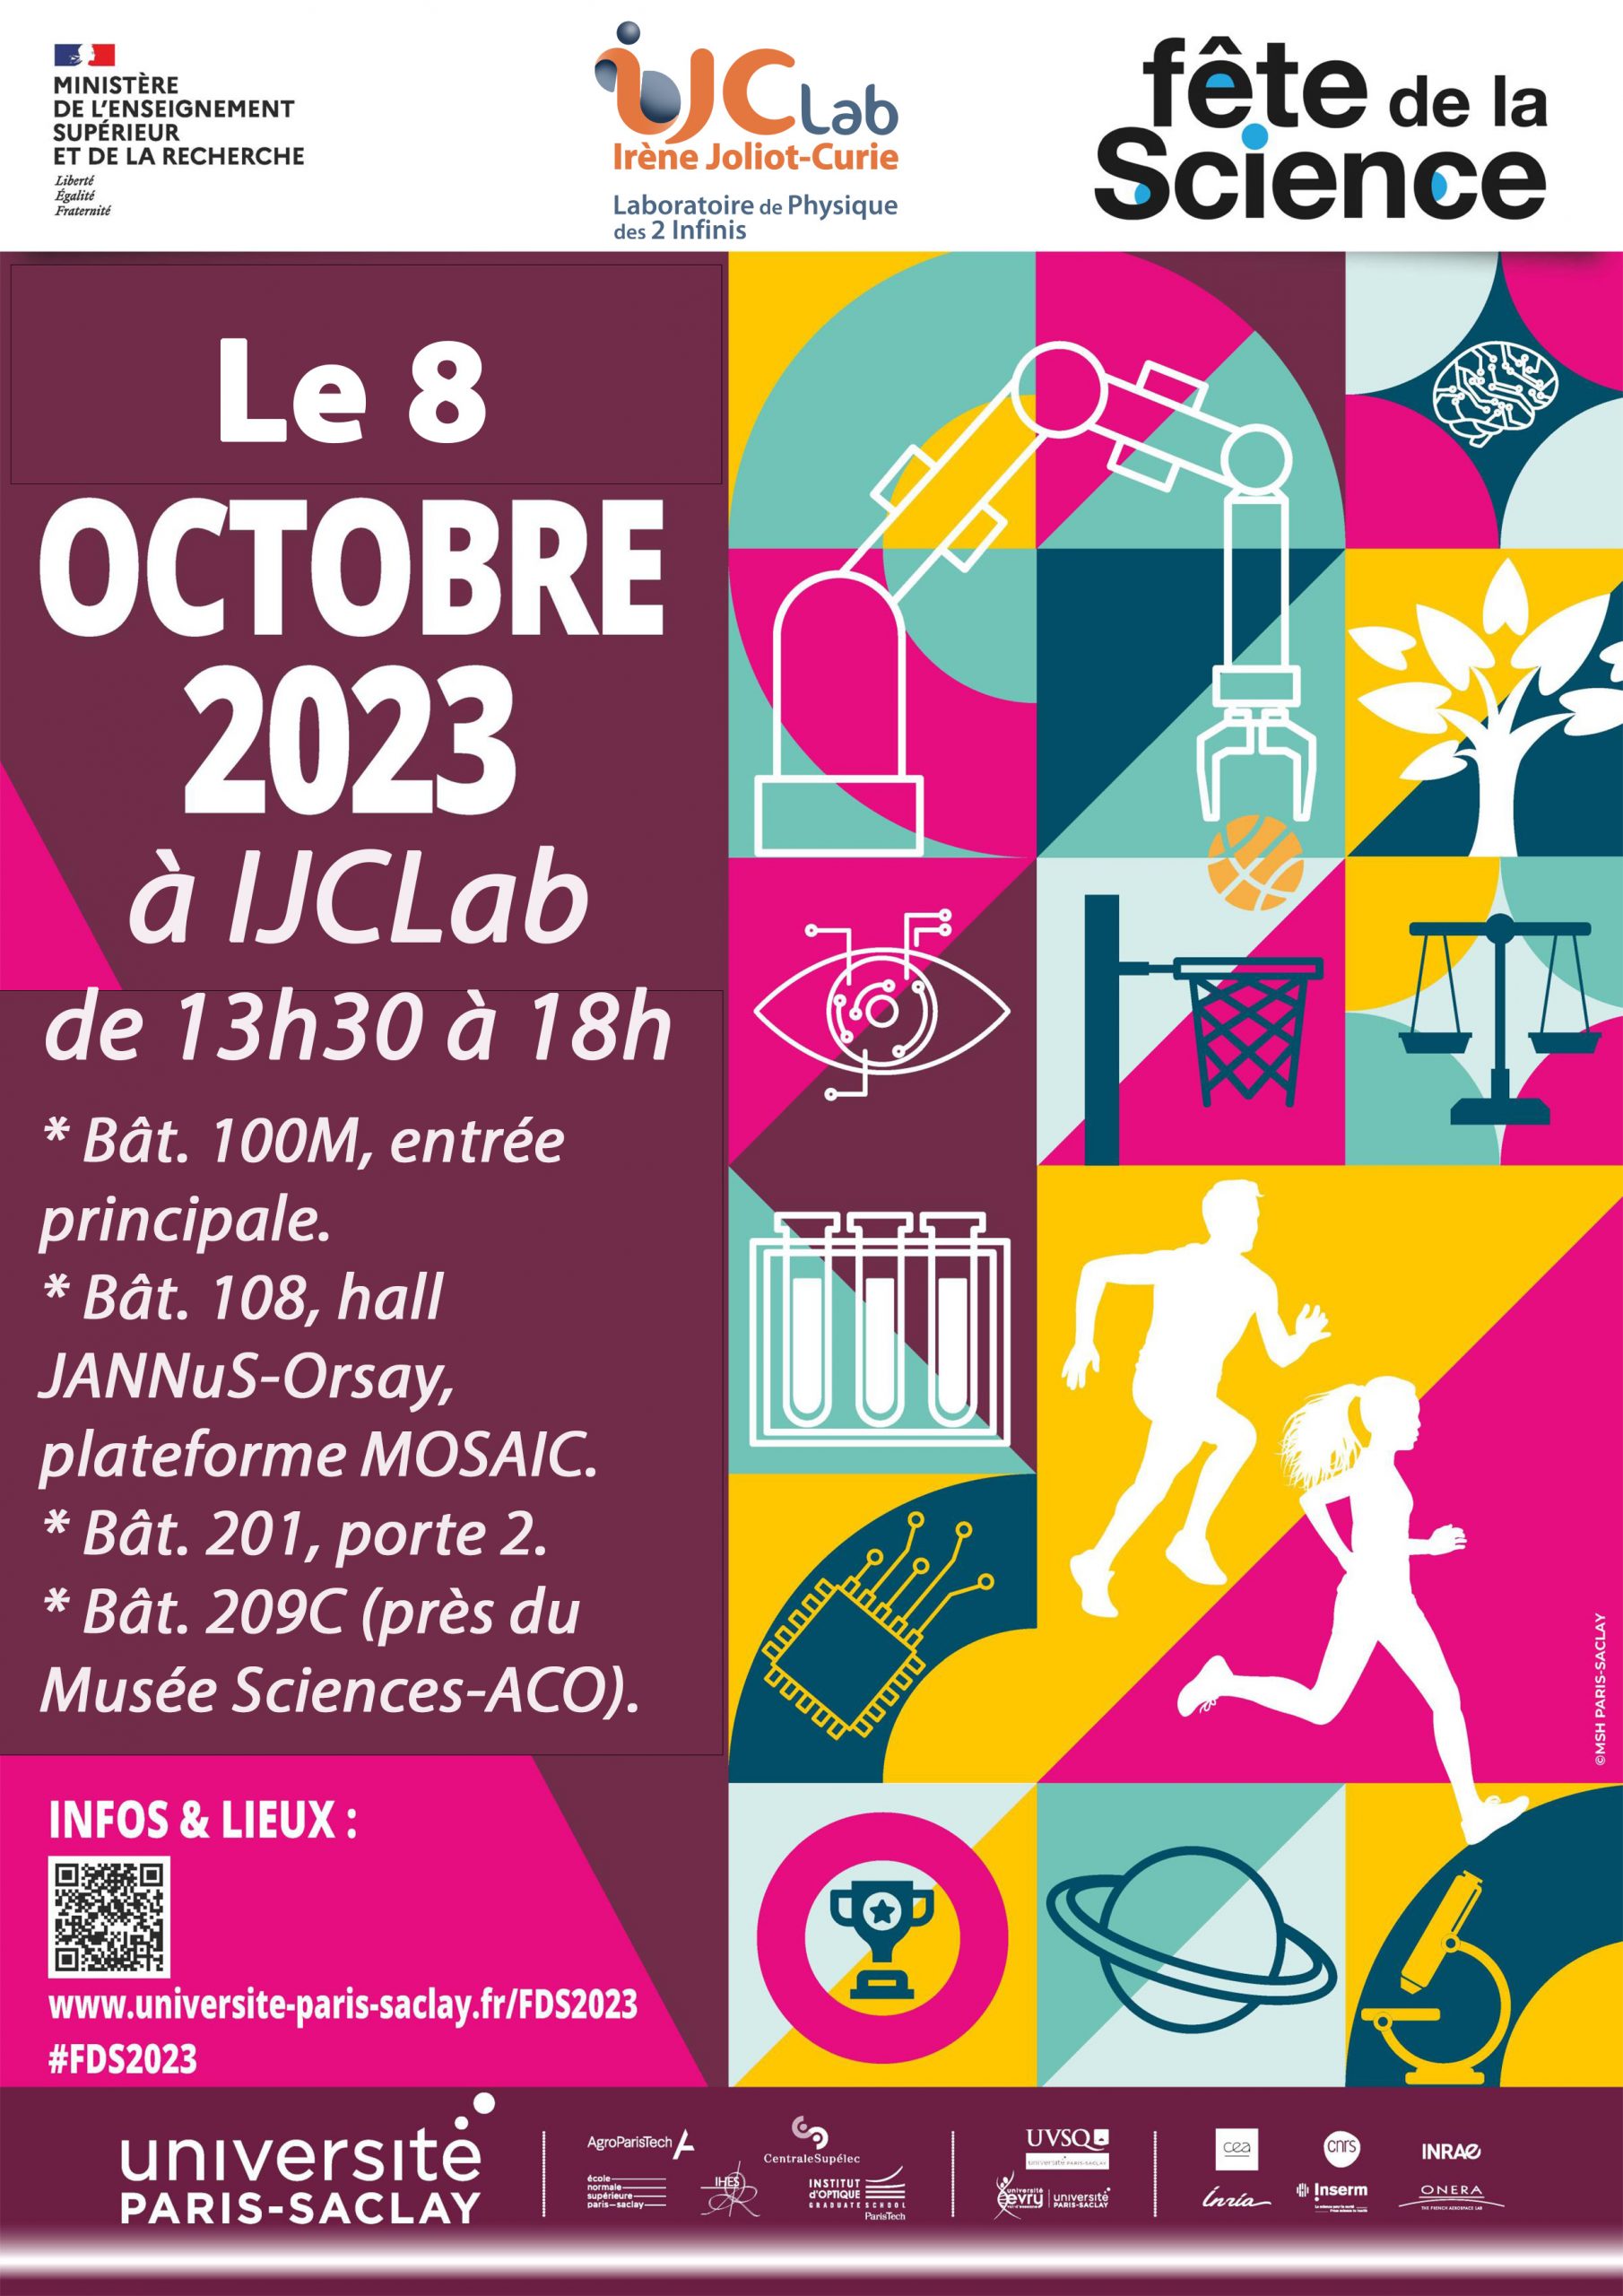 The 2023 Science Festival at IJCLab